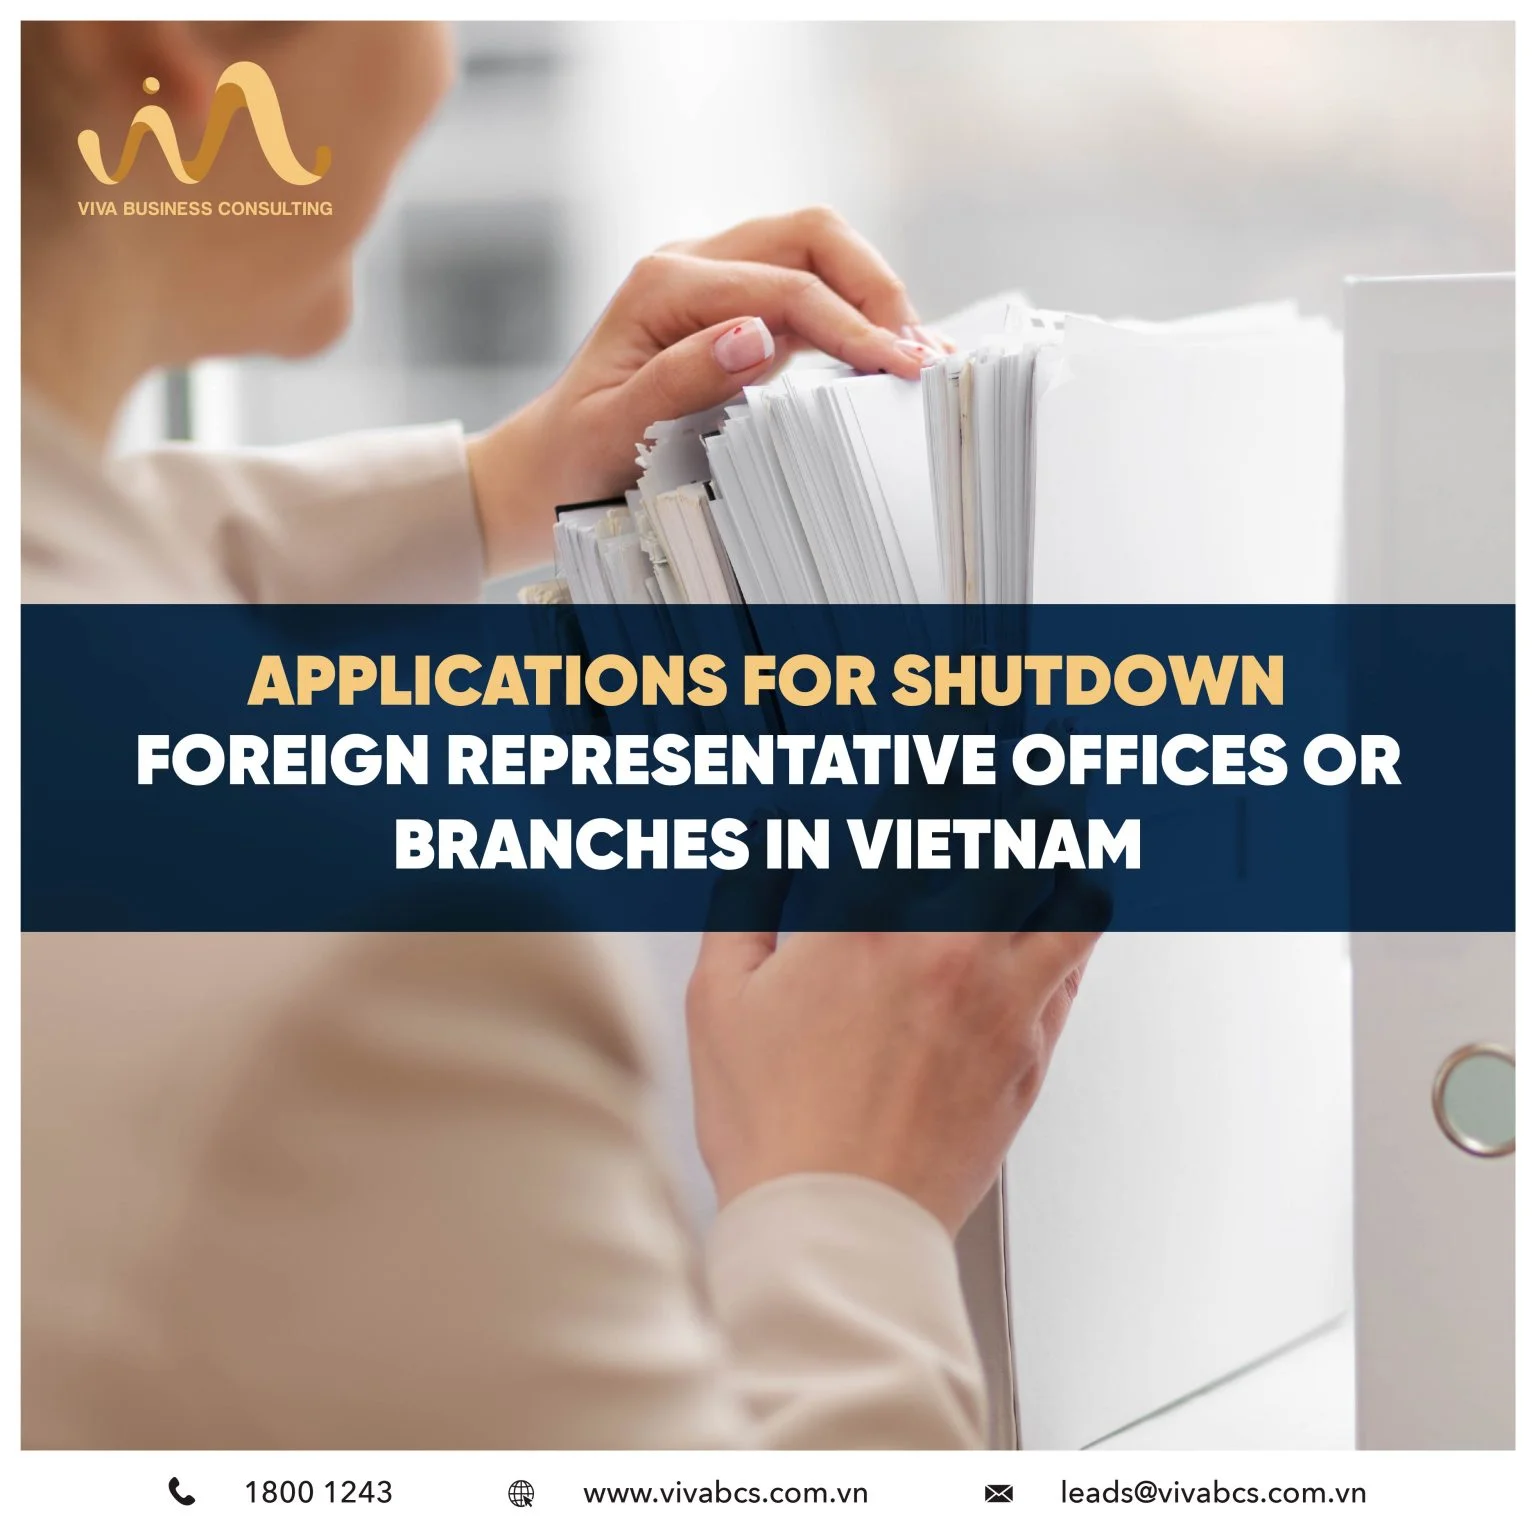 Shutdown and dissolution foreign representative offices or branches in Vietnam